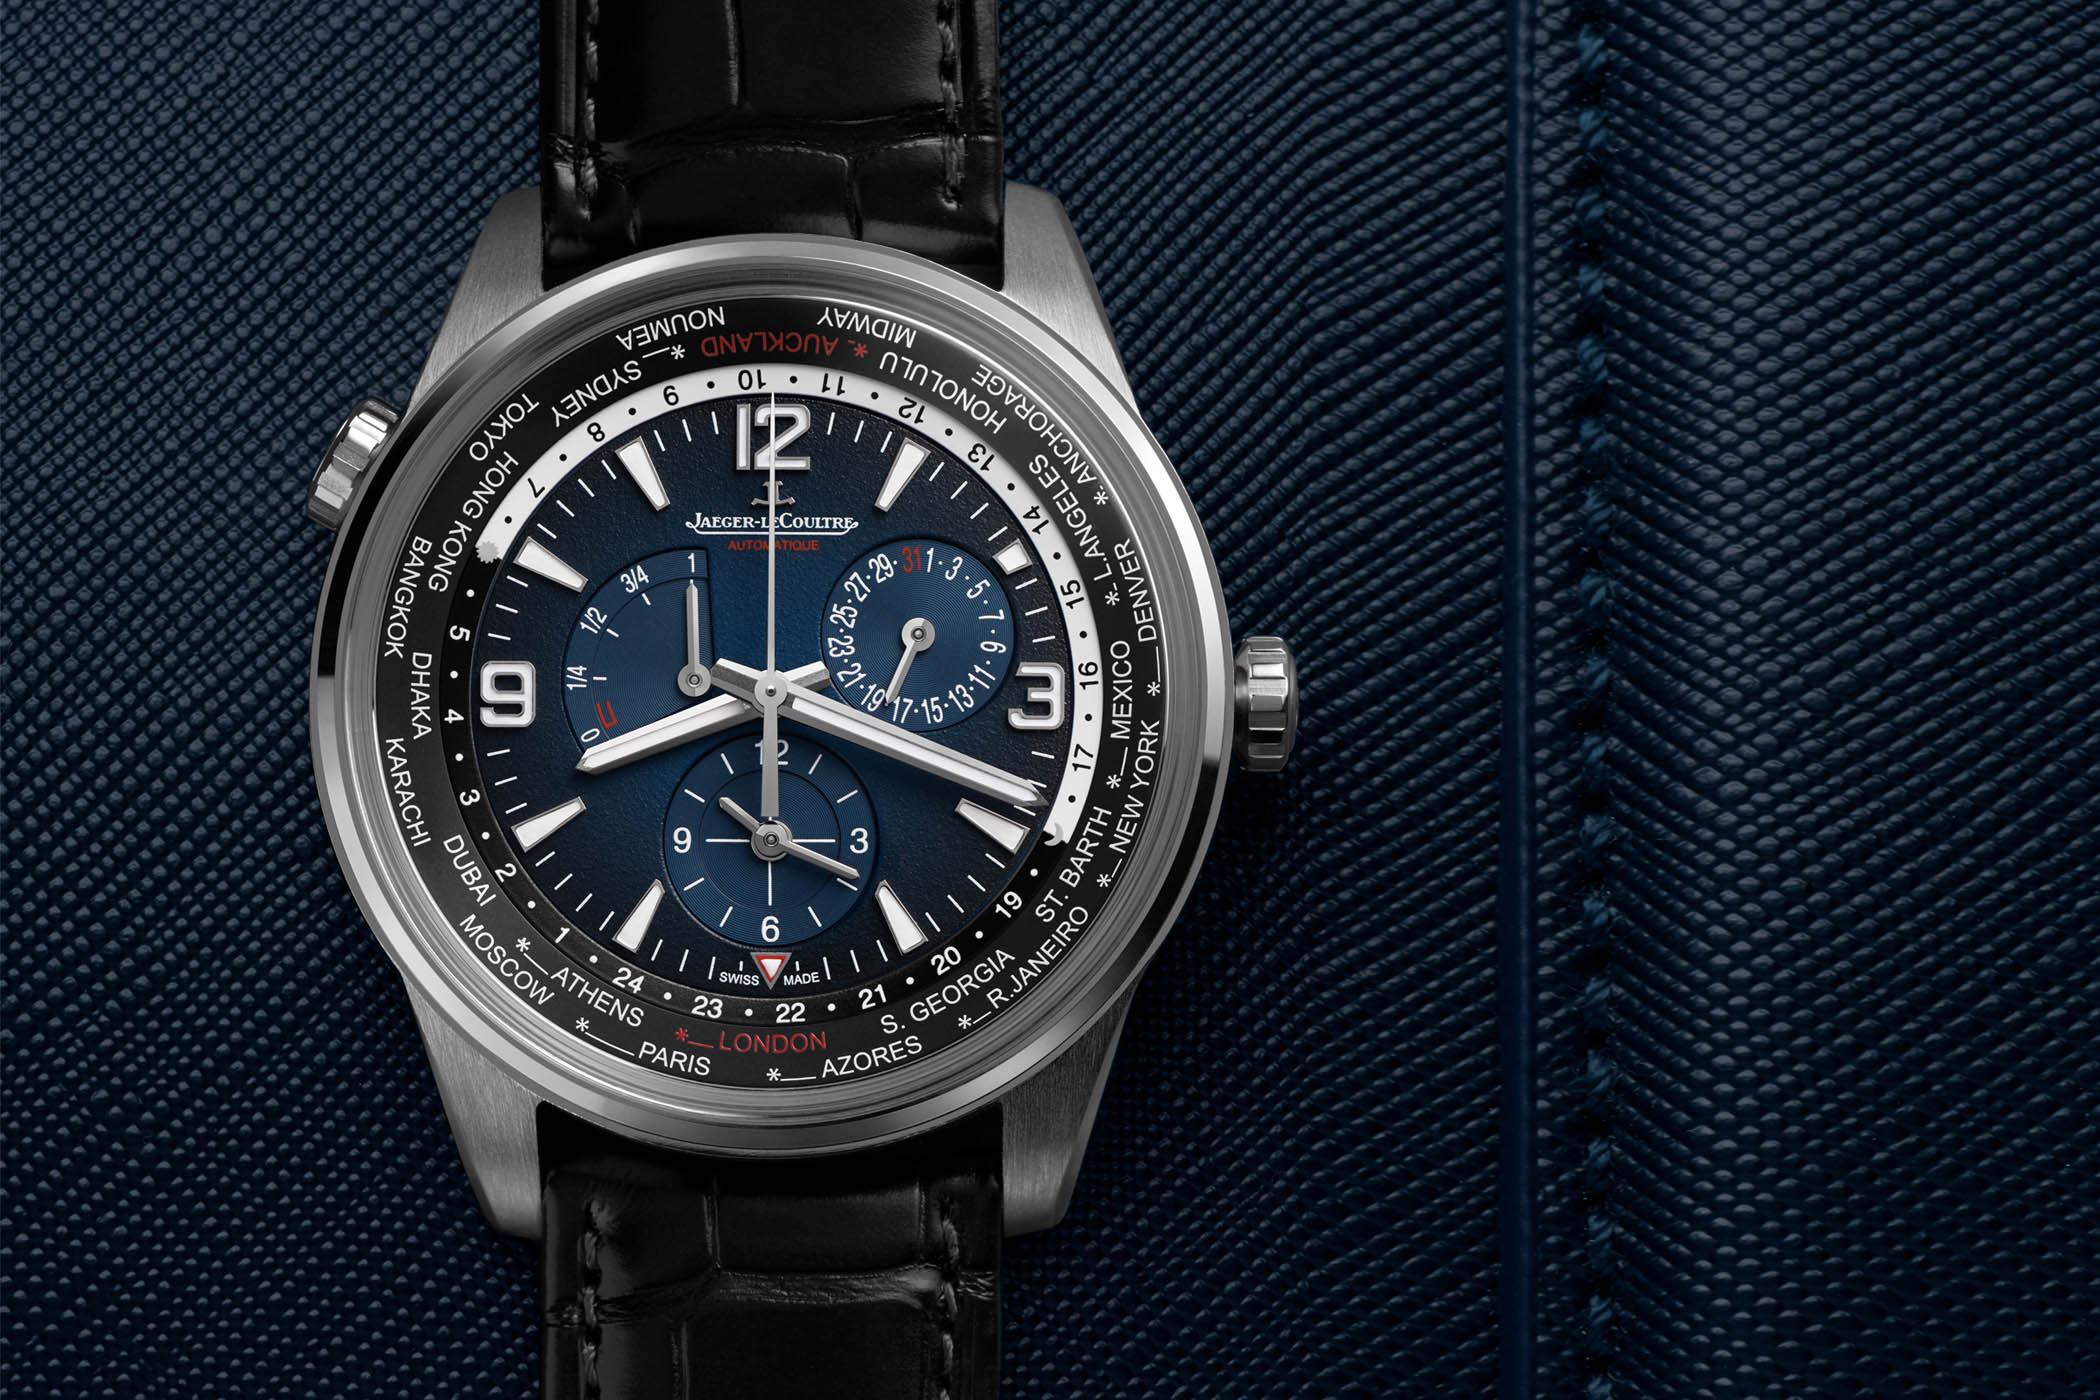 Jaeger-LeCoultre Polaris Geographic WT Limited Edition